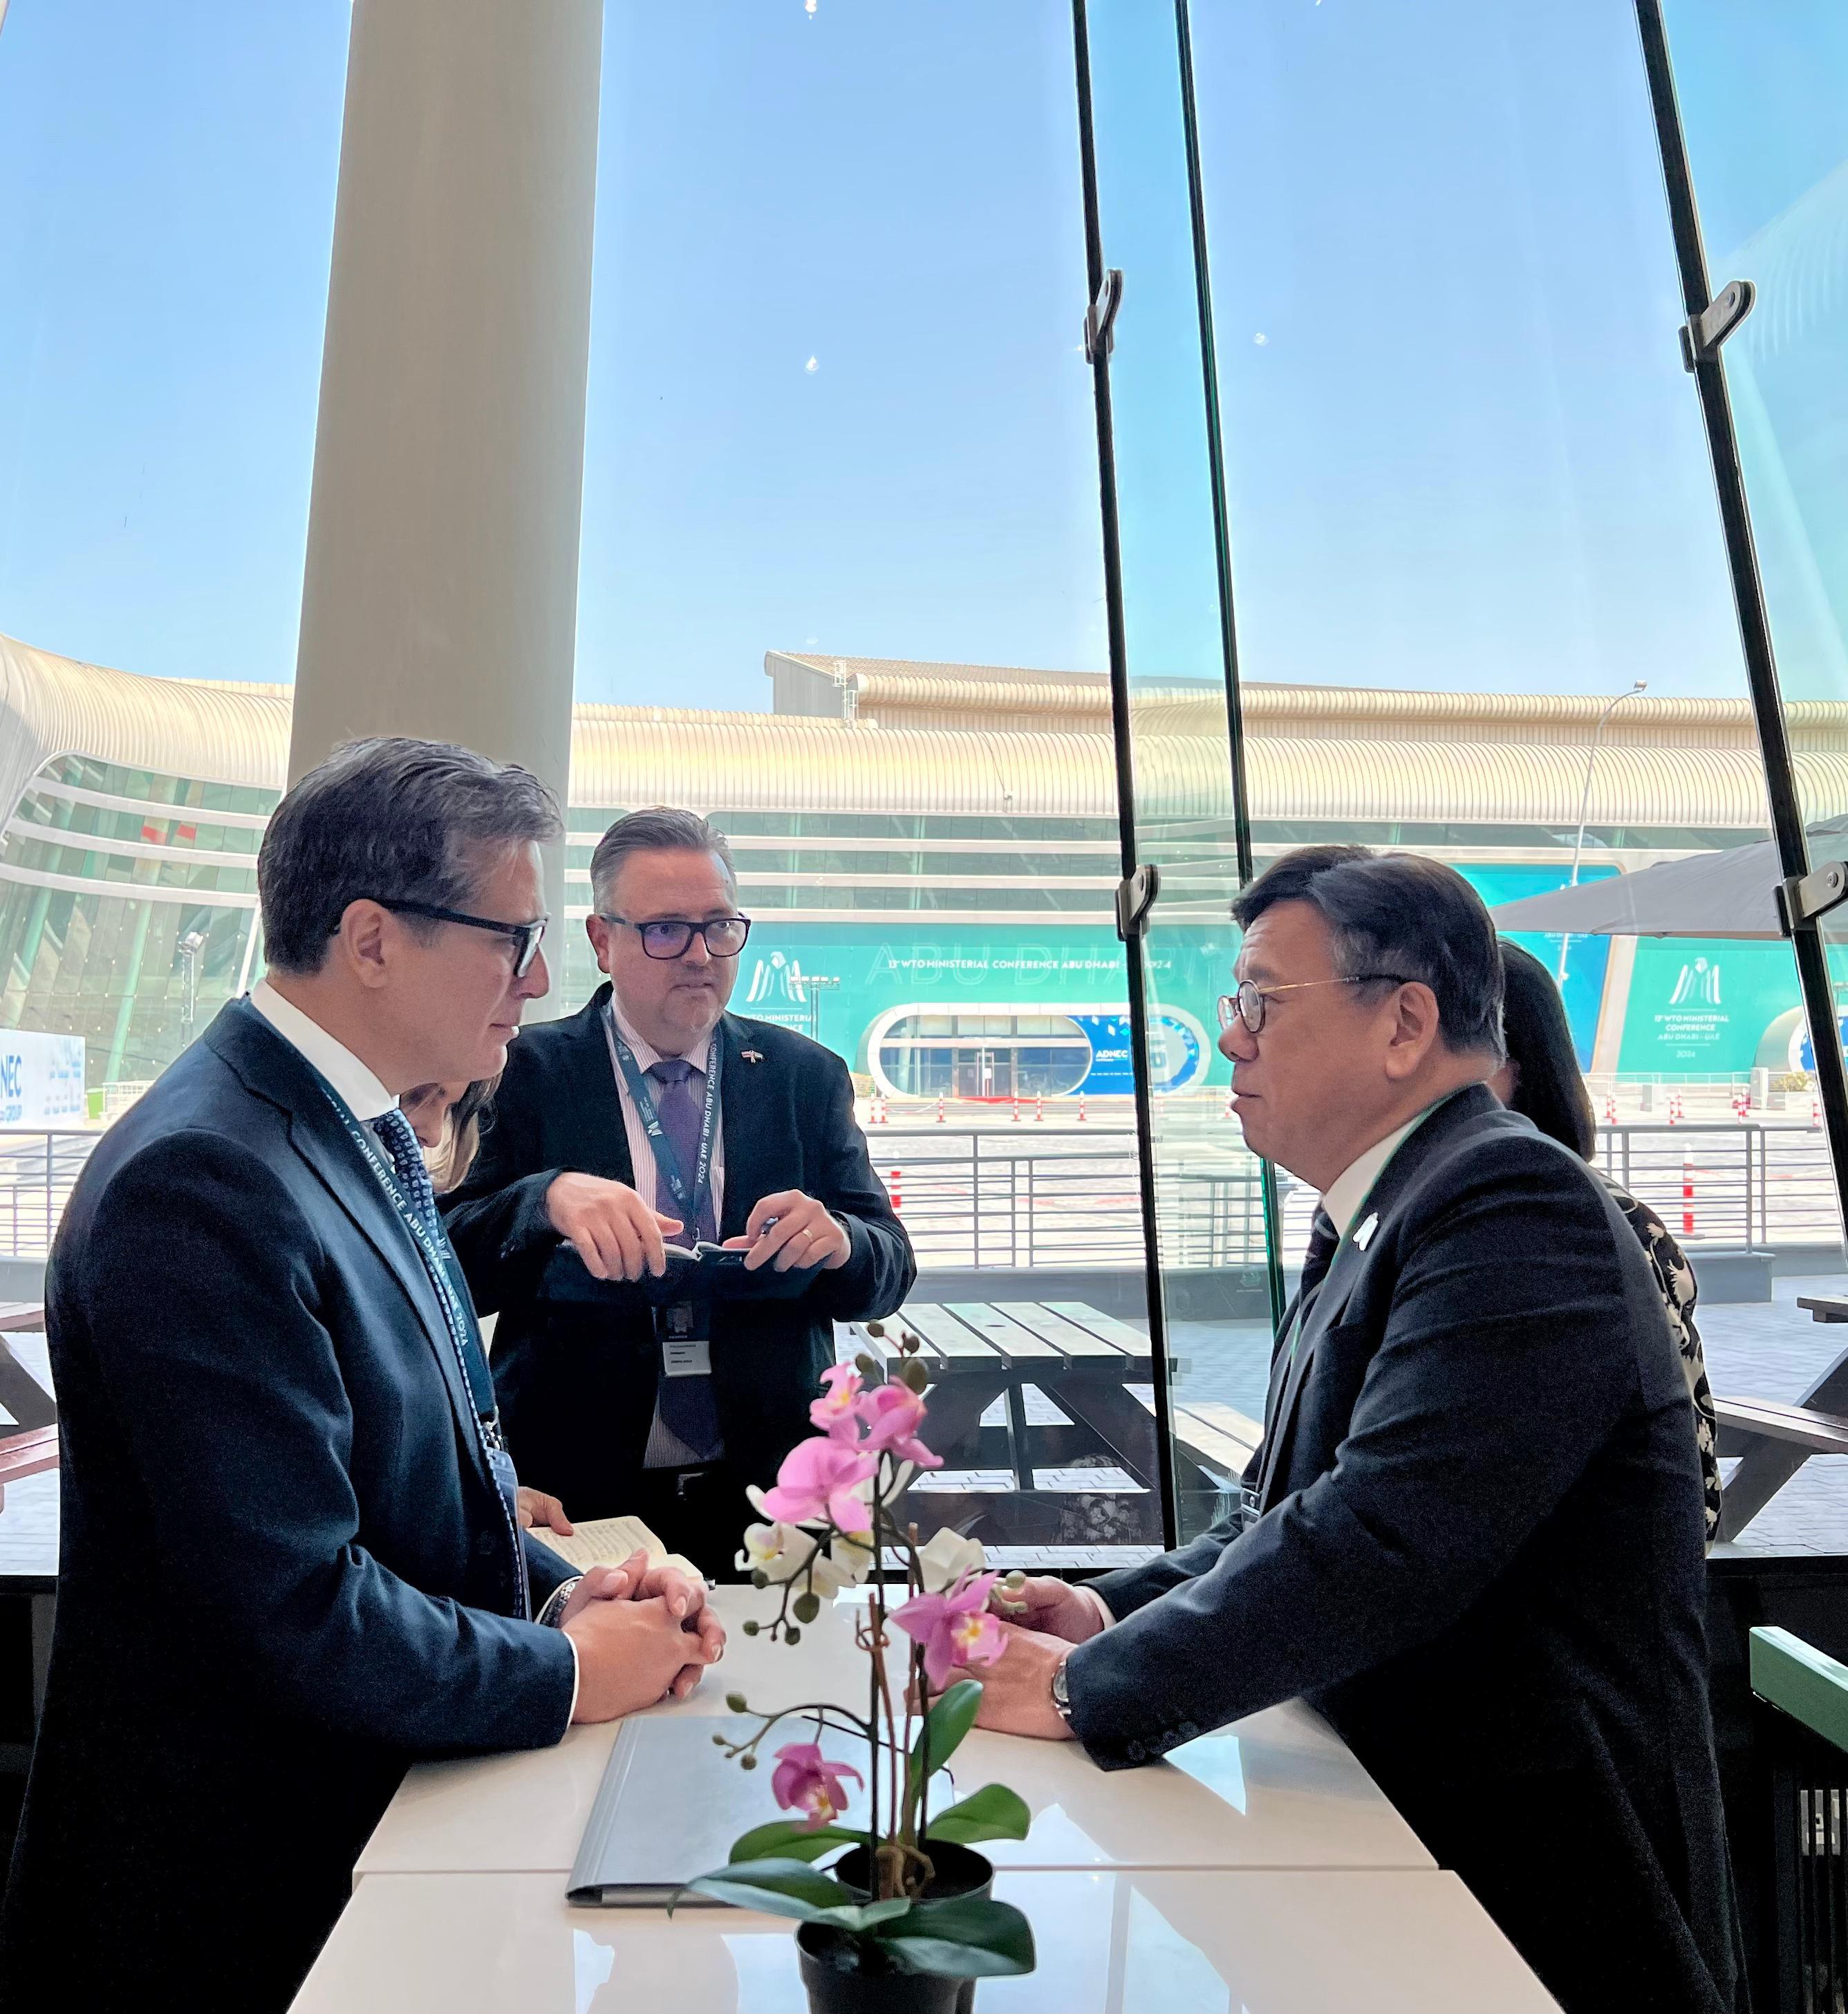 The Secretary for Commerce and Economic Development, Mr Algernon Yau (right), met with the Minister of Foreign Trade of Costa Rica, Mr Manuel Tovar Rivera (left), on the sidelines of the 13th World Trade Organization Ministerial Conference in Abu Dhabi, the United Arab Emirates, on February 28 (Abu Dhabi time) to exchange views on various trade and economic issues.